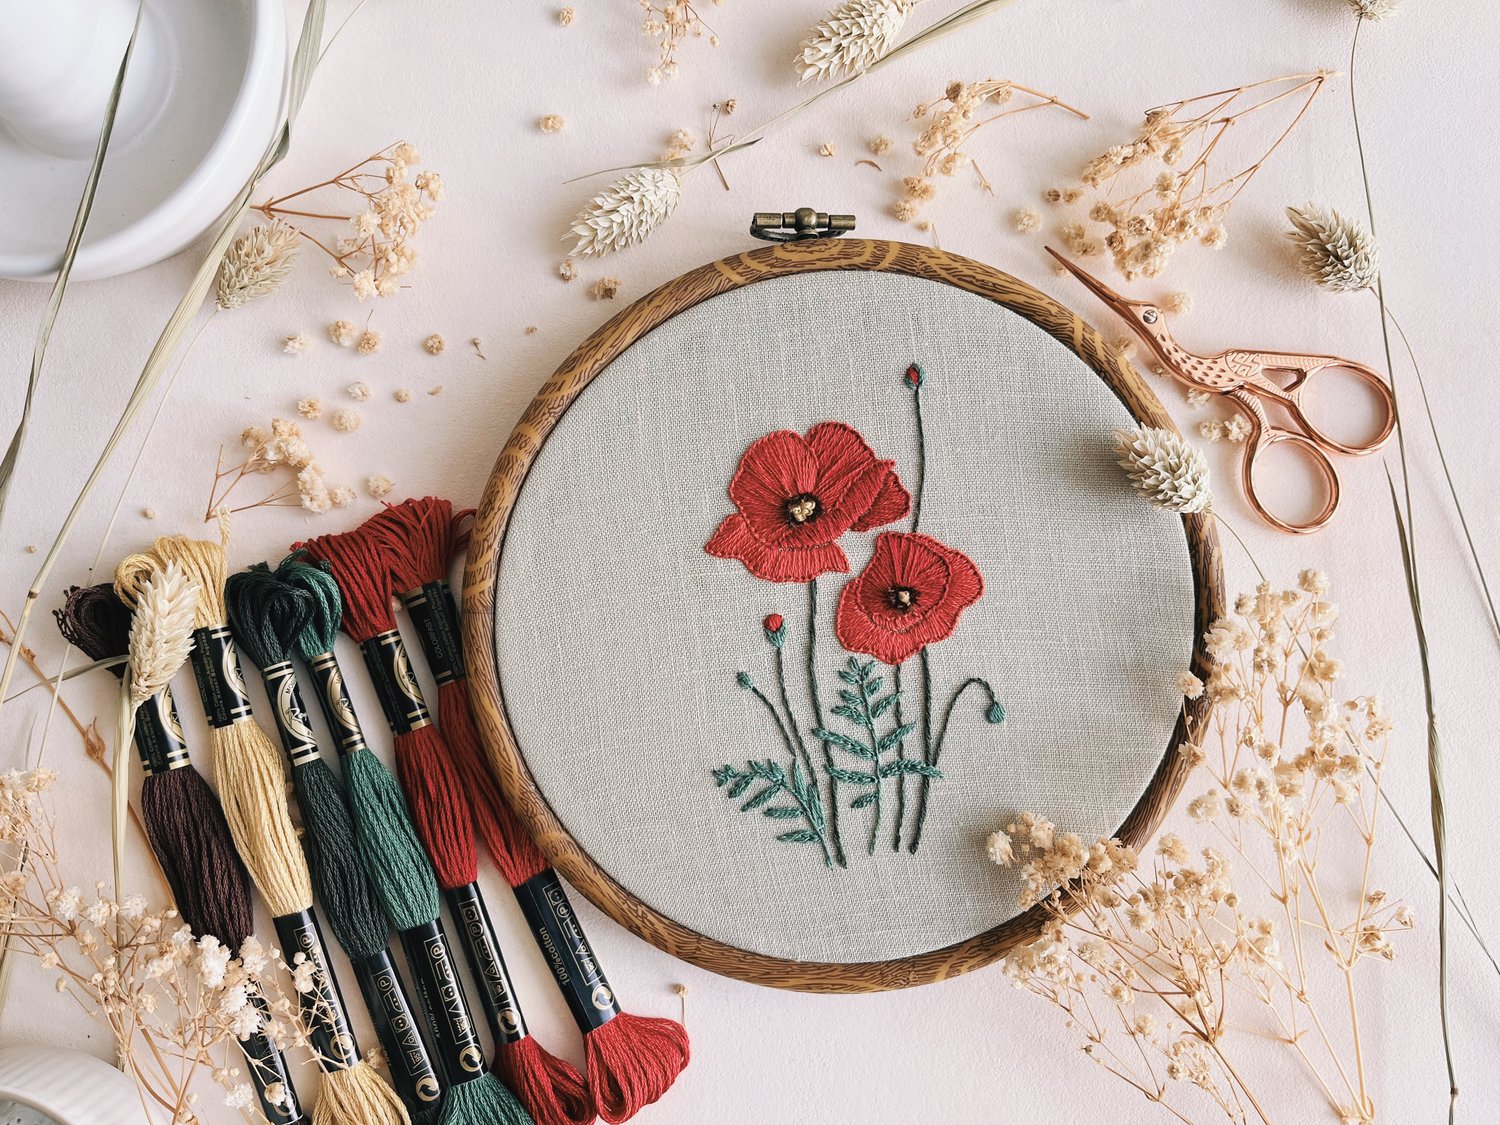 Buttonhole Wheel Stitch, A Step-by-Step Guide with FREE Poppies Embroidery Pattern